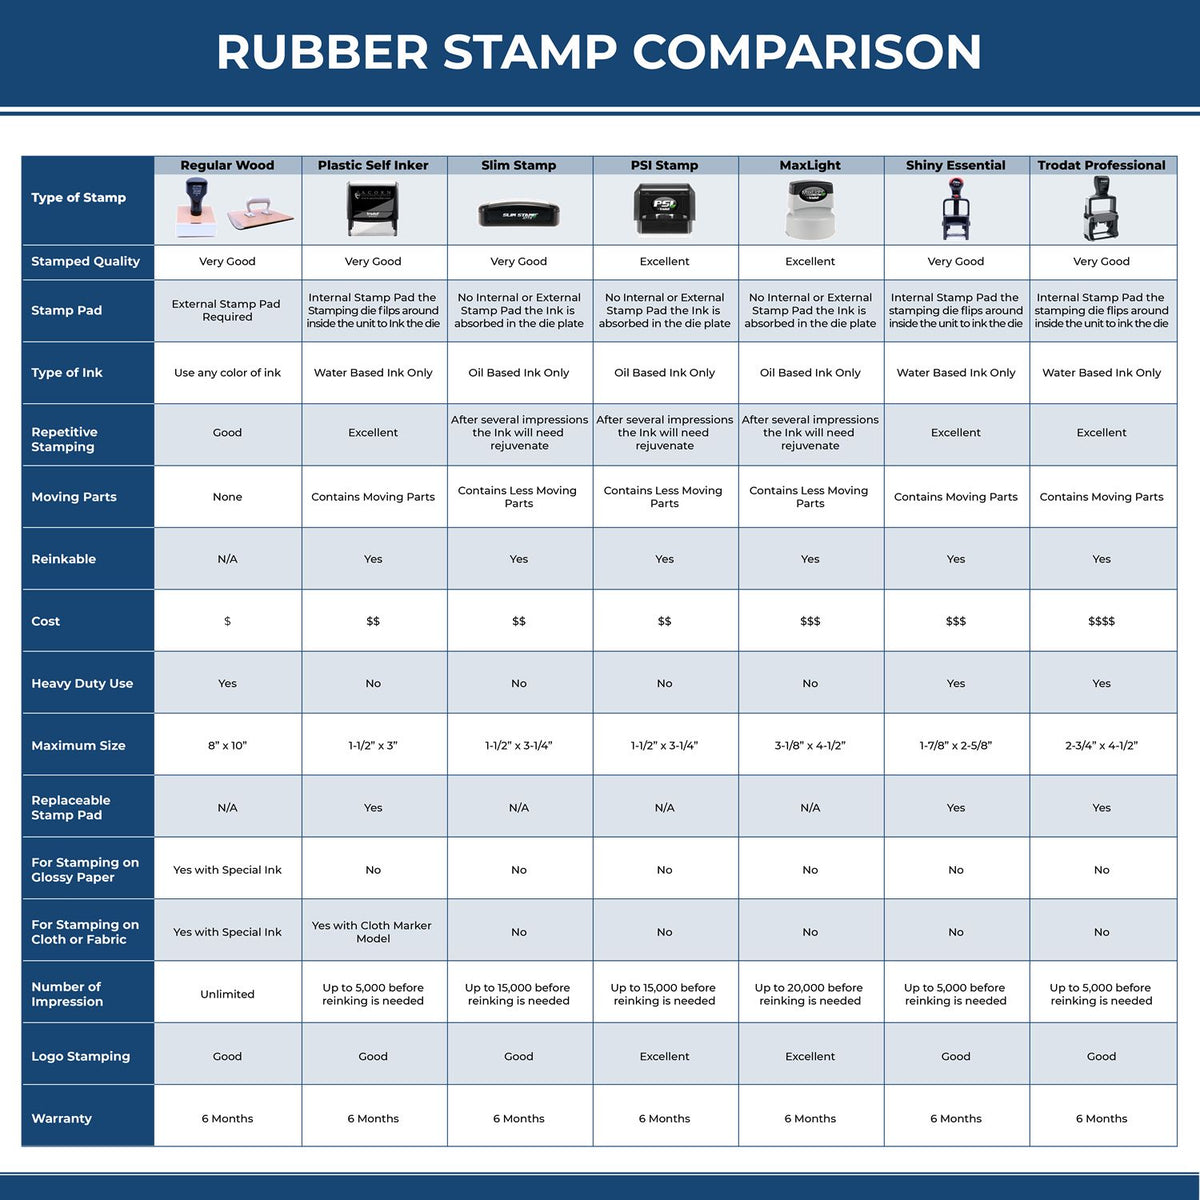 A comparison chart for the different types of mount models available for the Premium MaxLight Pre-Inked West Virginia Engineering Stamp.